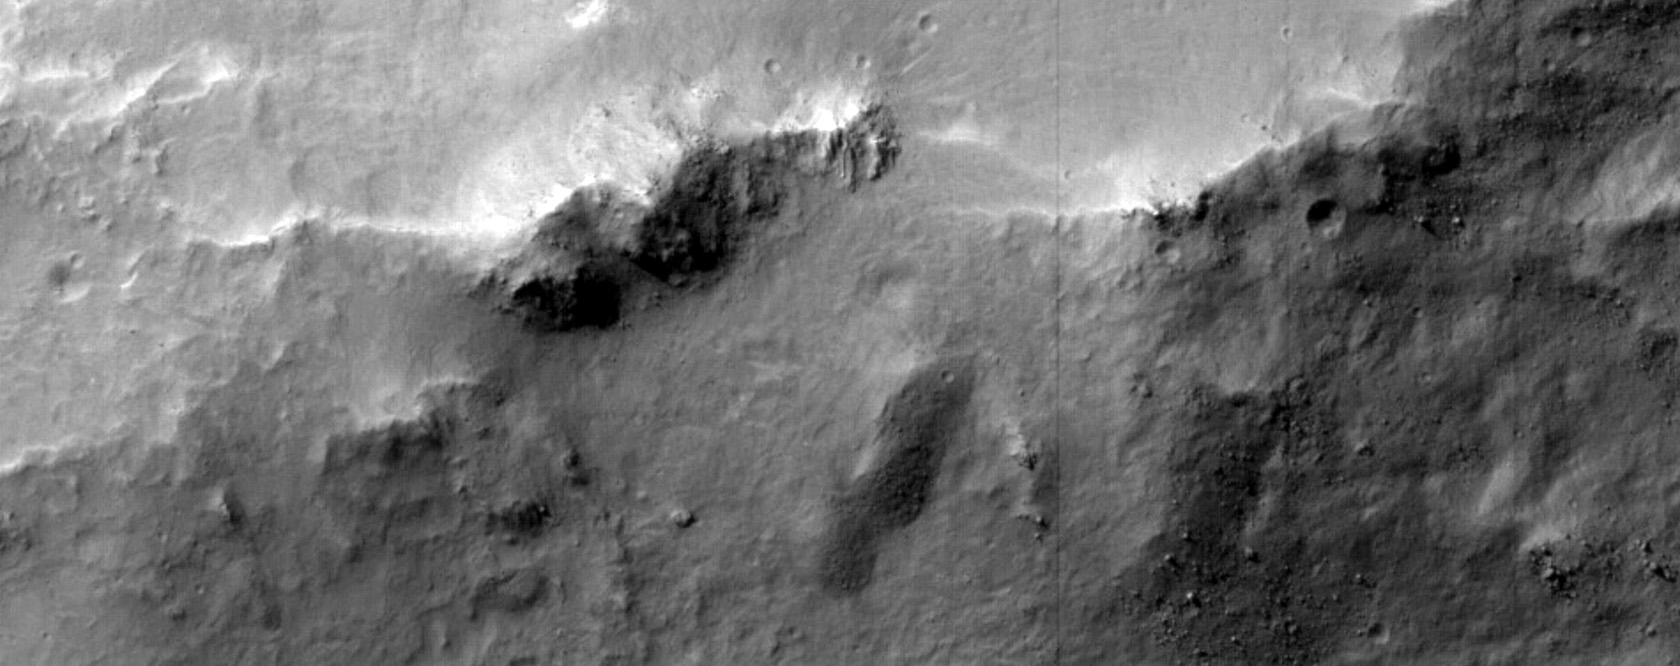 Possible Hydrated Crater in Tyrrhena Terra